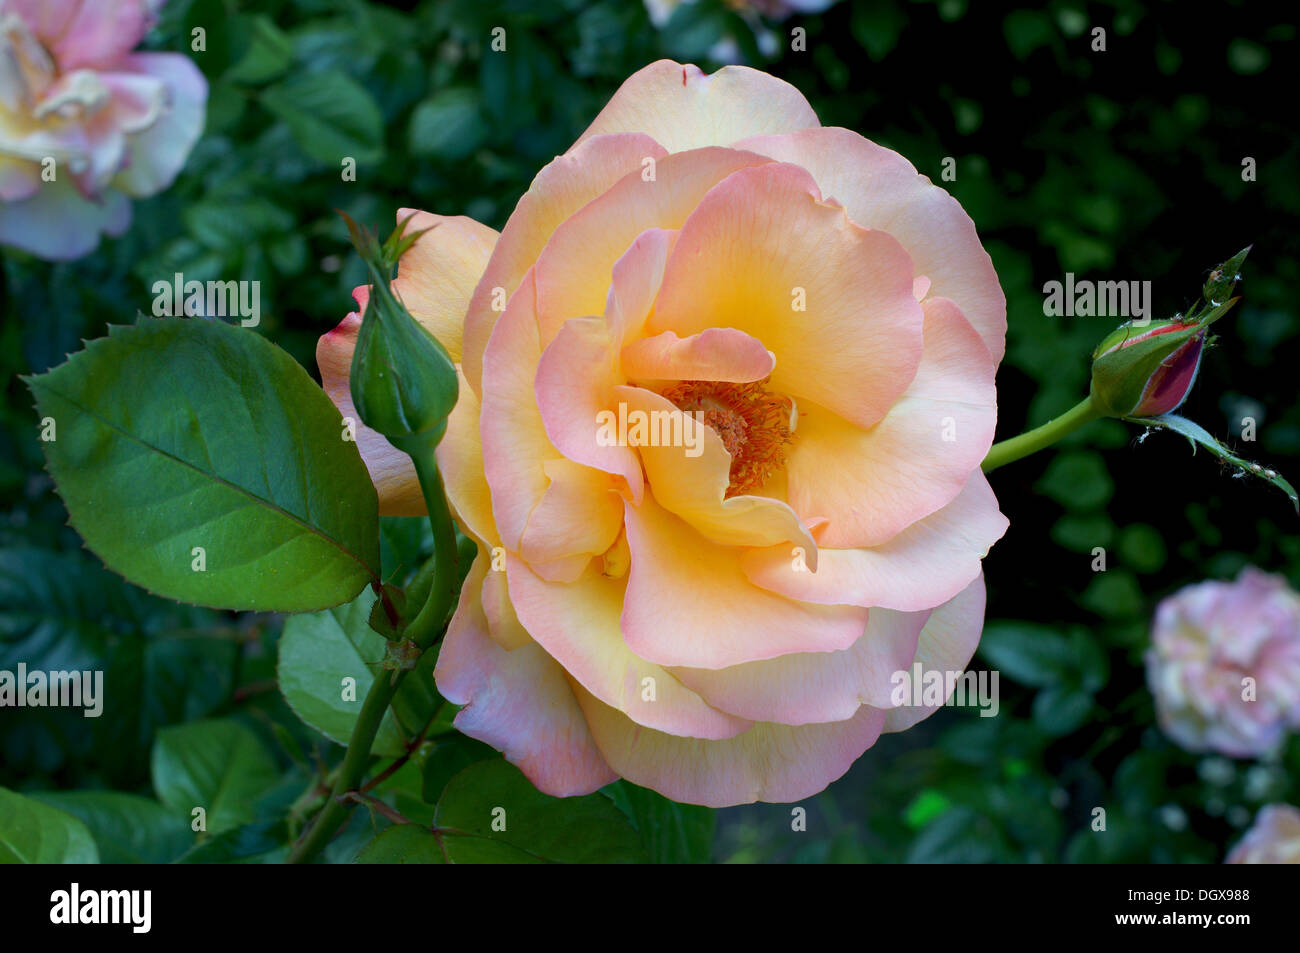 Pink and yellow rose close up Stock Photo